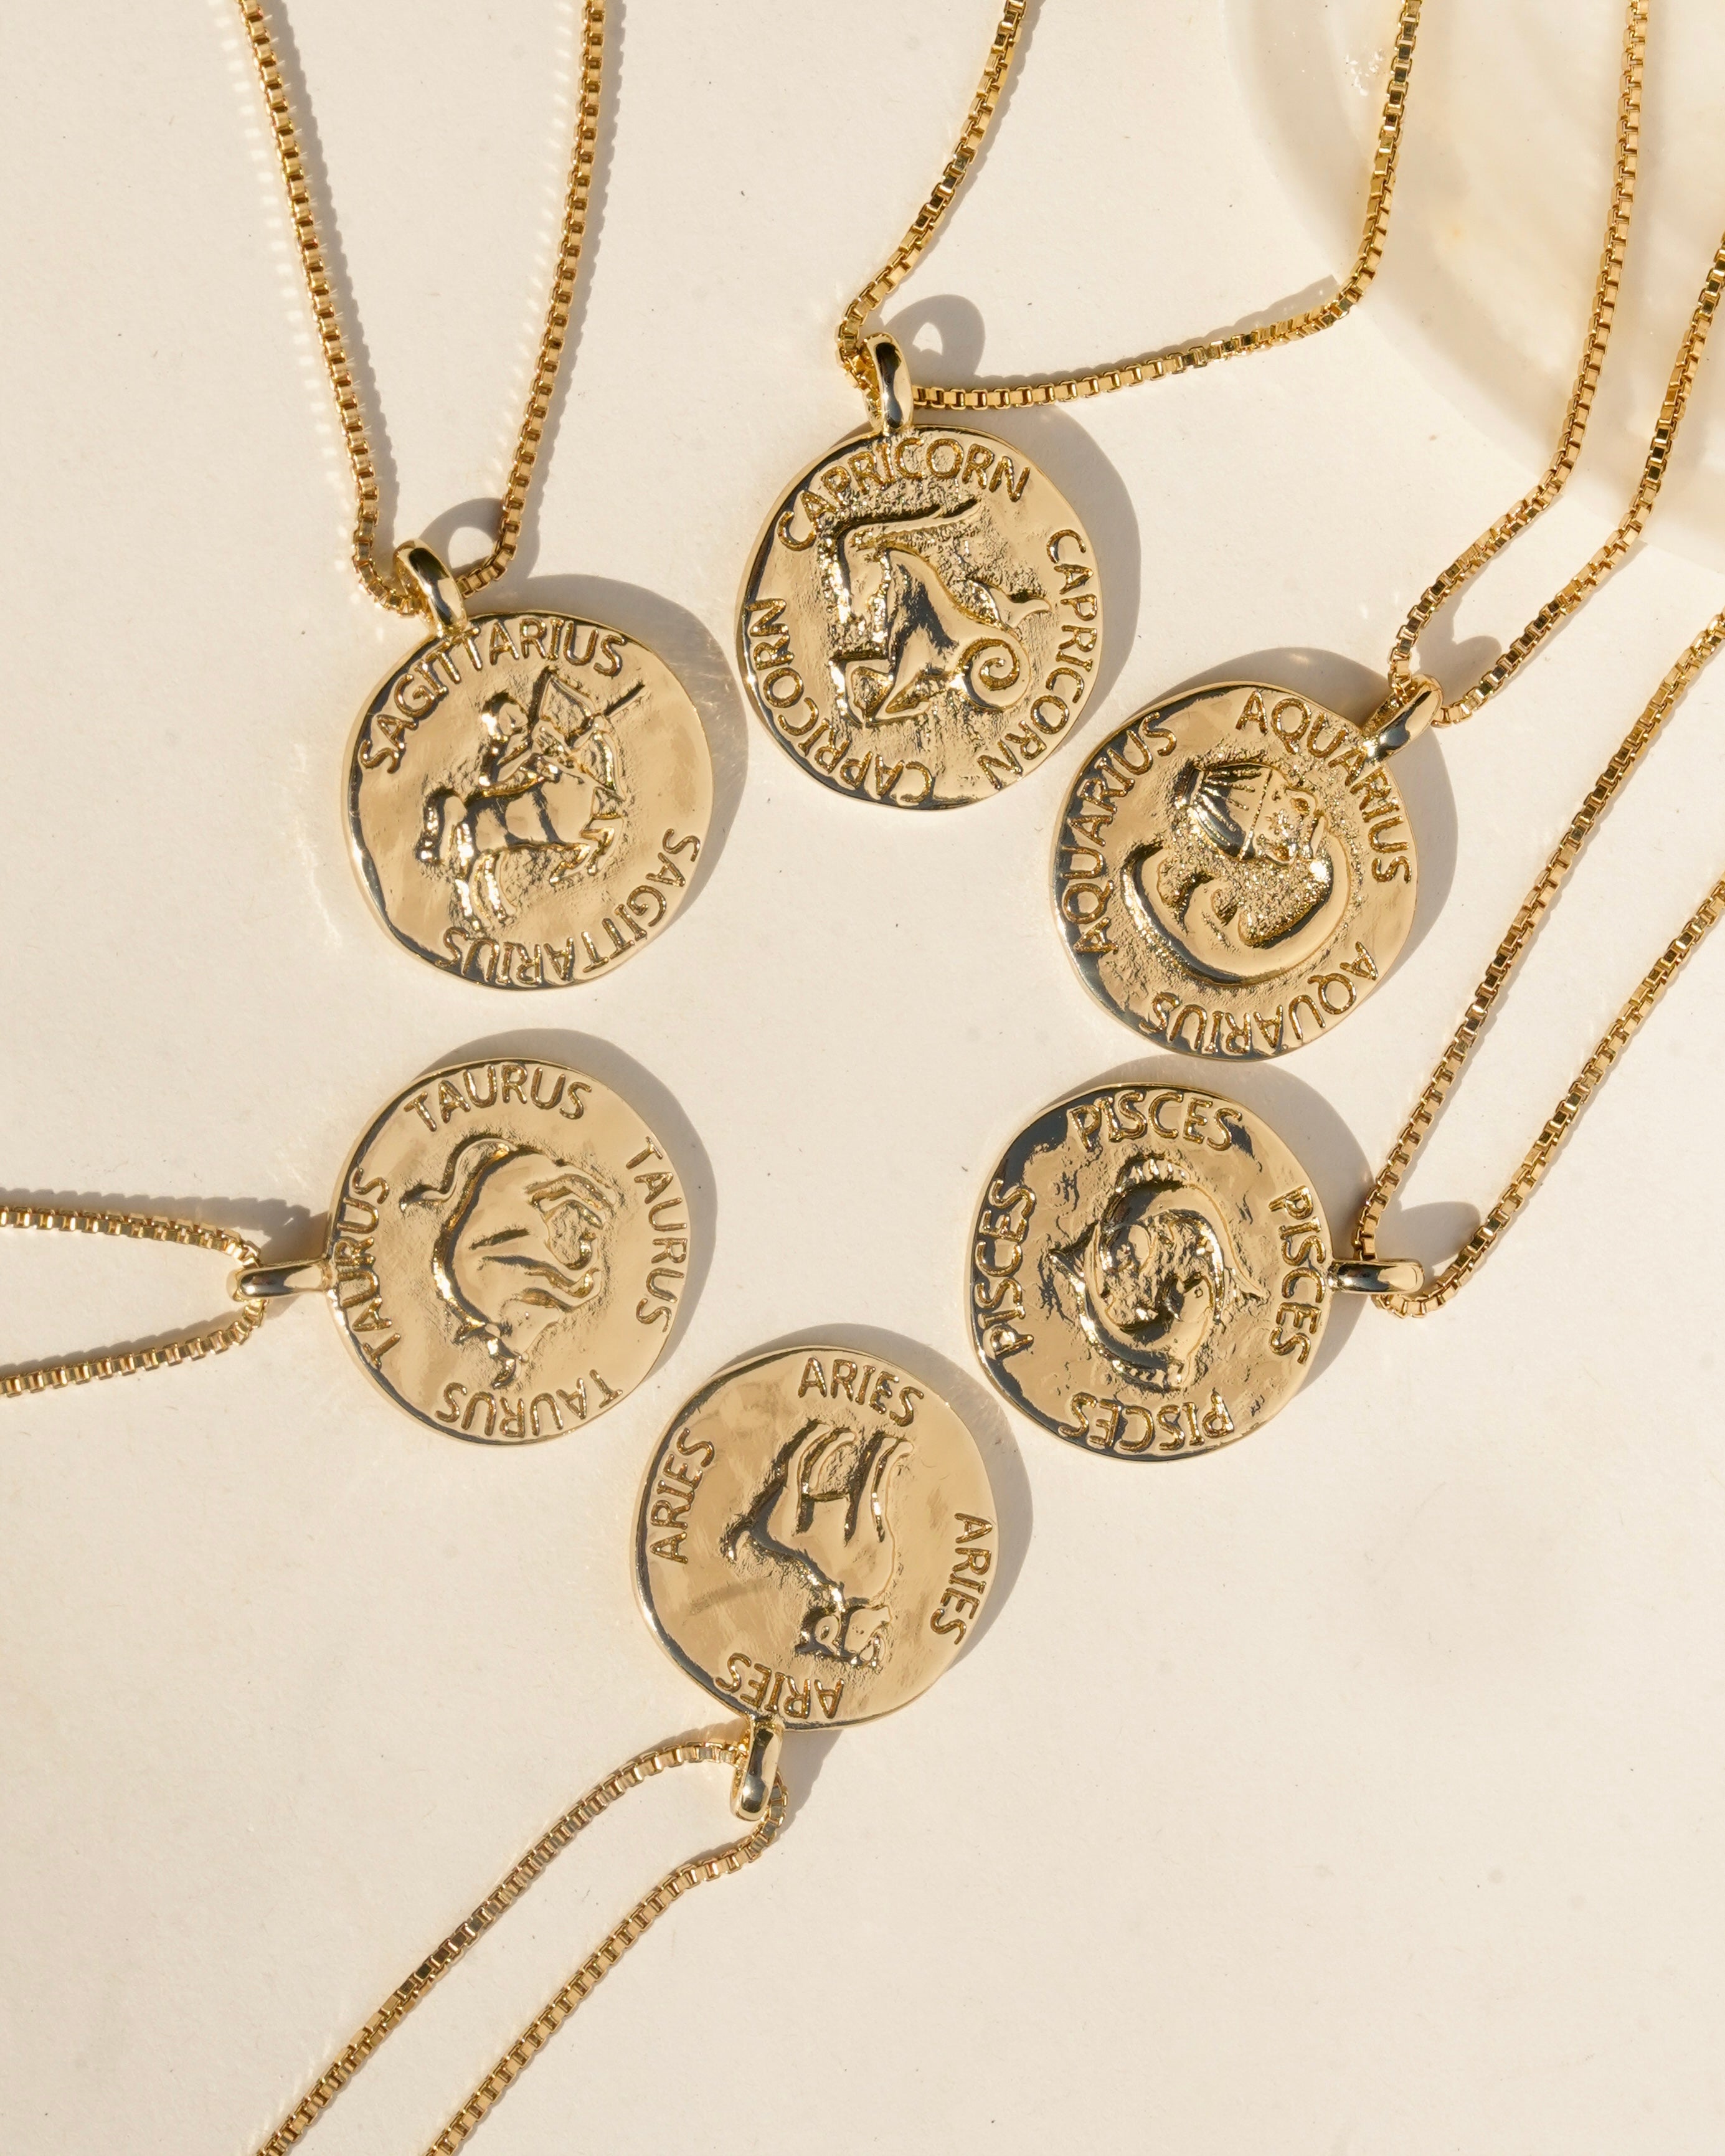 Solid Gold Coin Necklace, Gold Coin Pendant Necklace, Antique Necklace,  British Coin Gold Necklace, 14k Gold Necklace -  Denmark